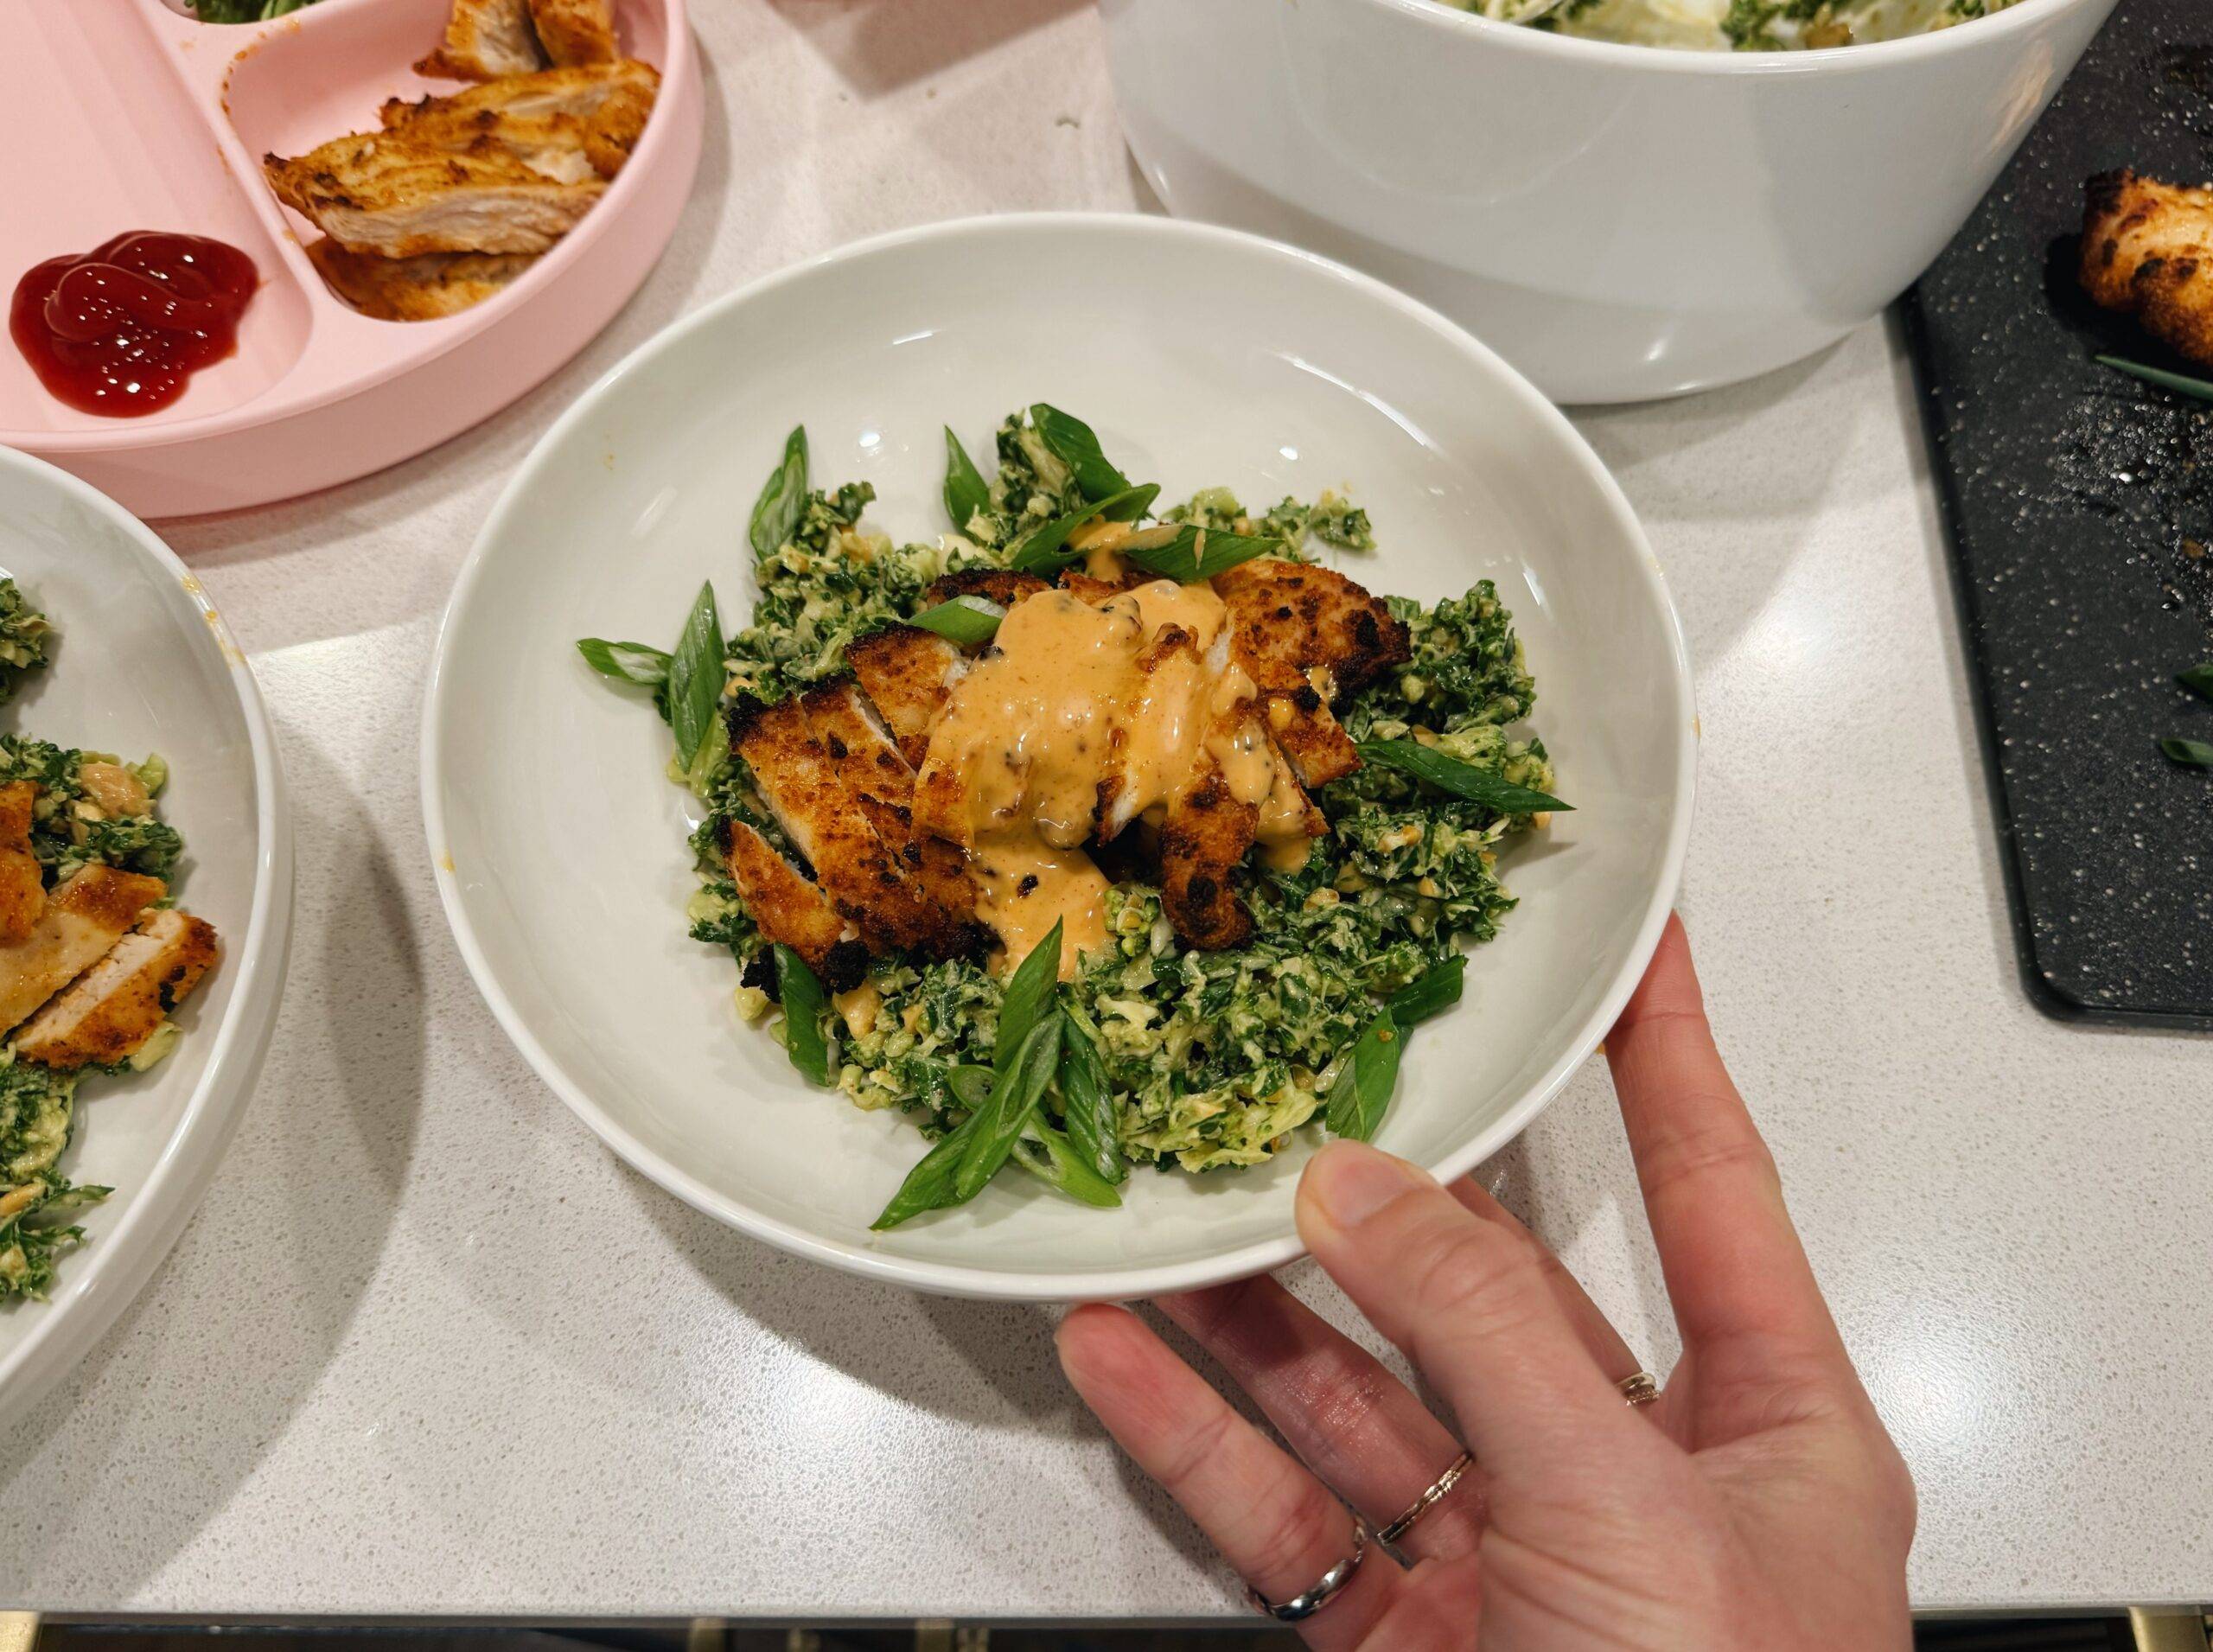 Chicken and salad in a bowl with gochujang sauce on top.